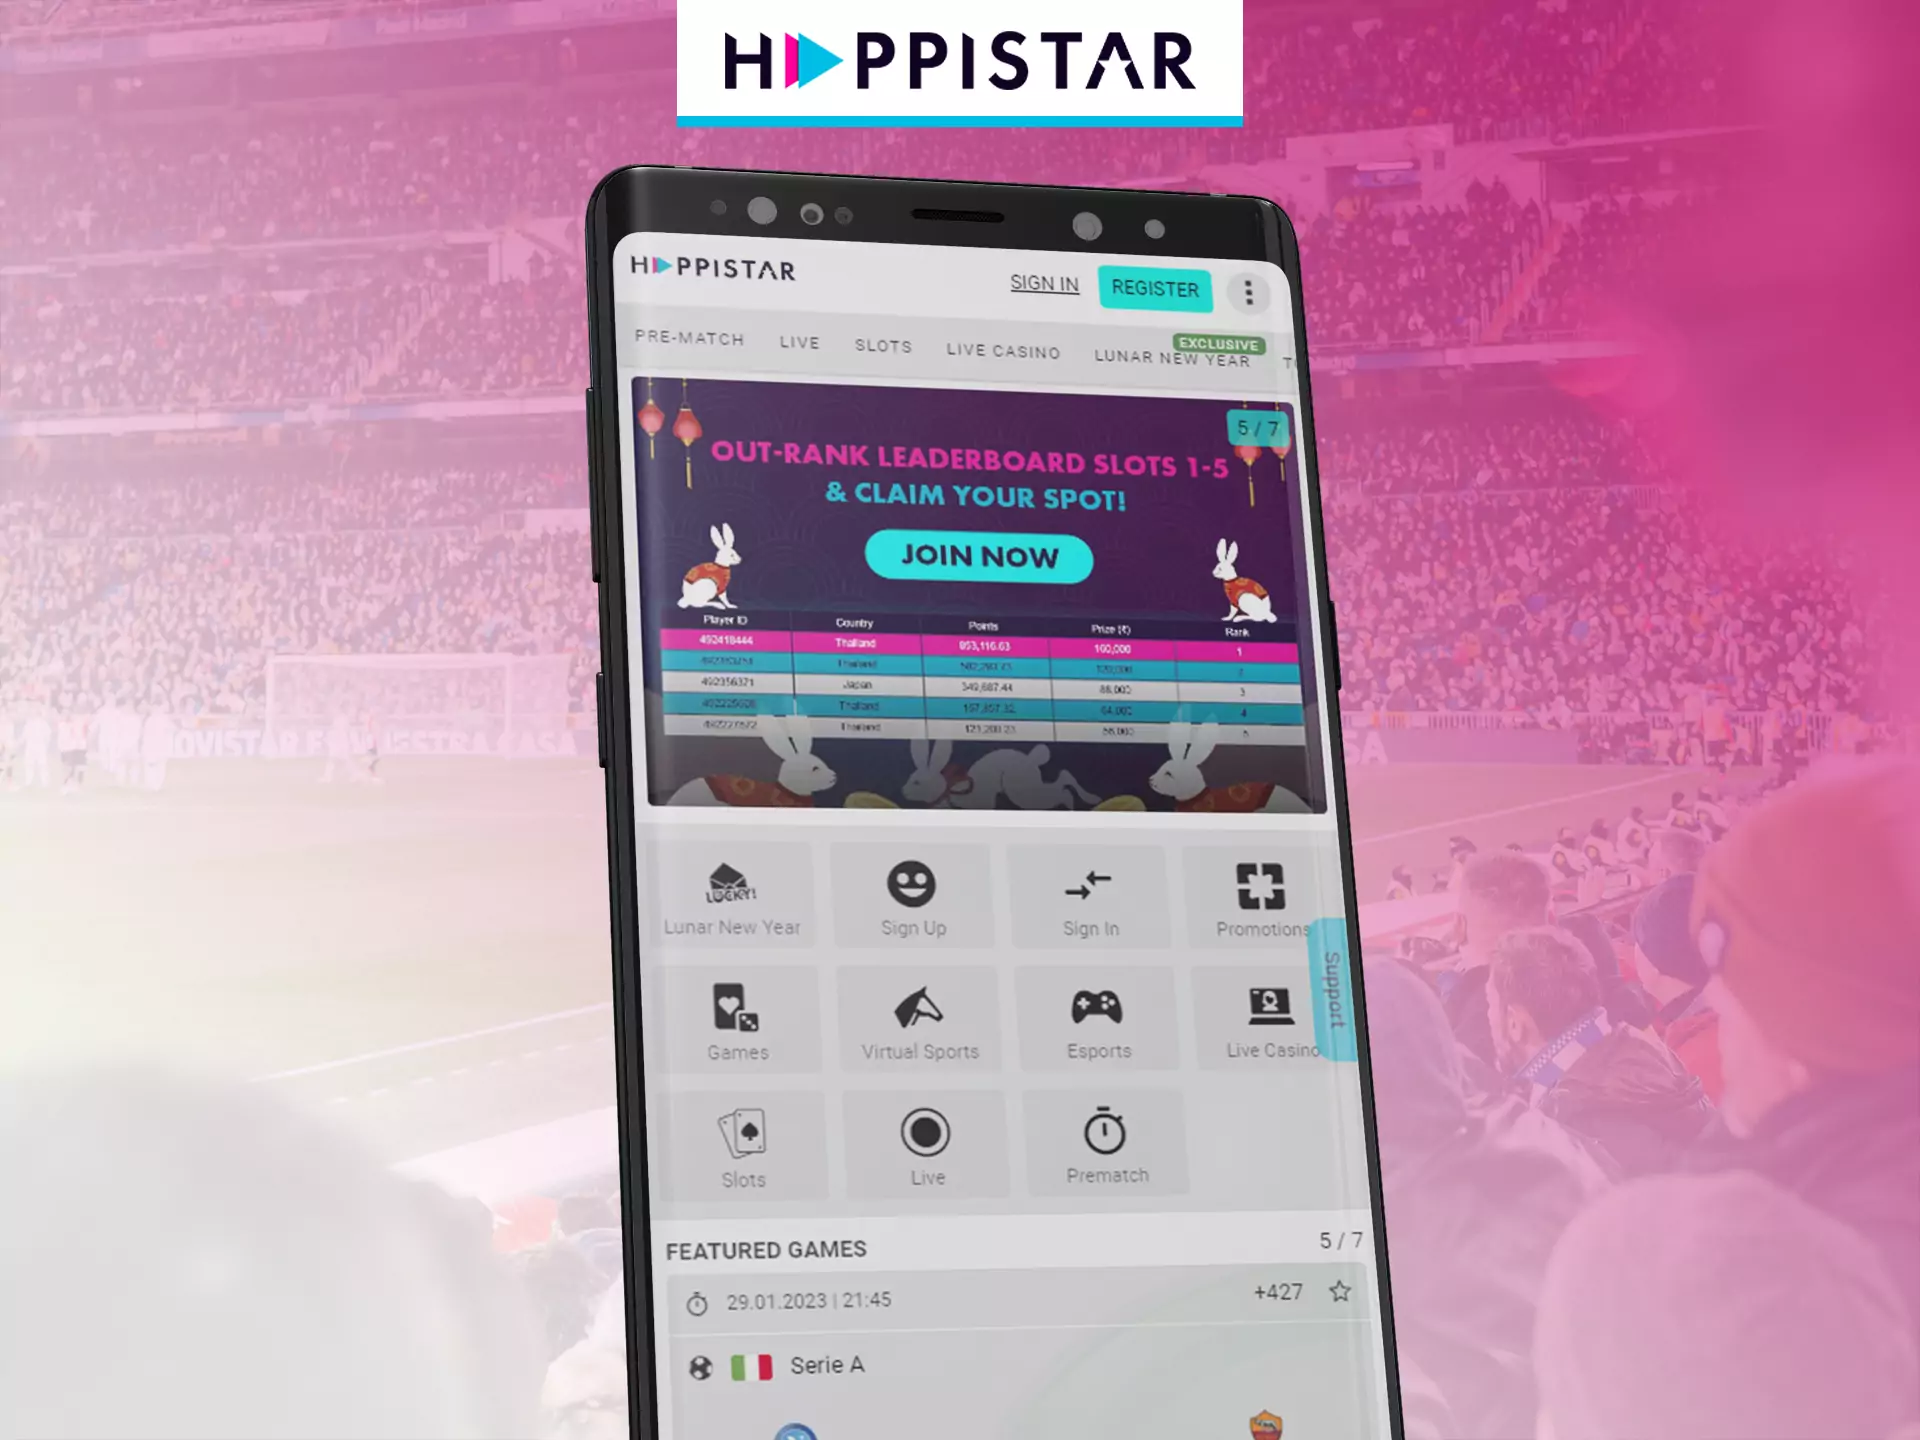 Visit the Happistar website from your mobile browser.